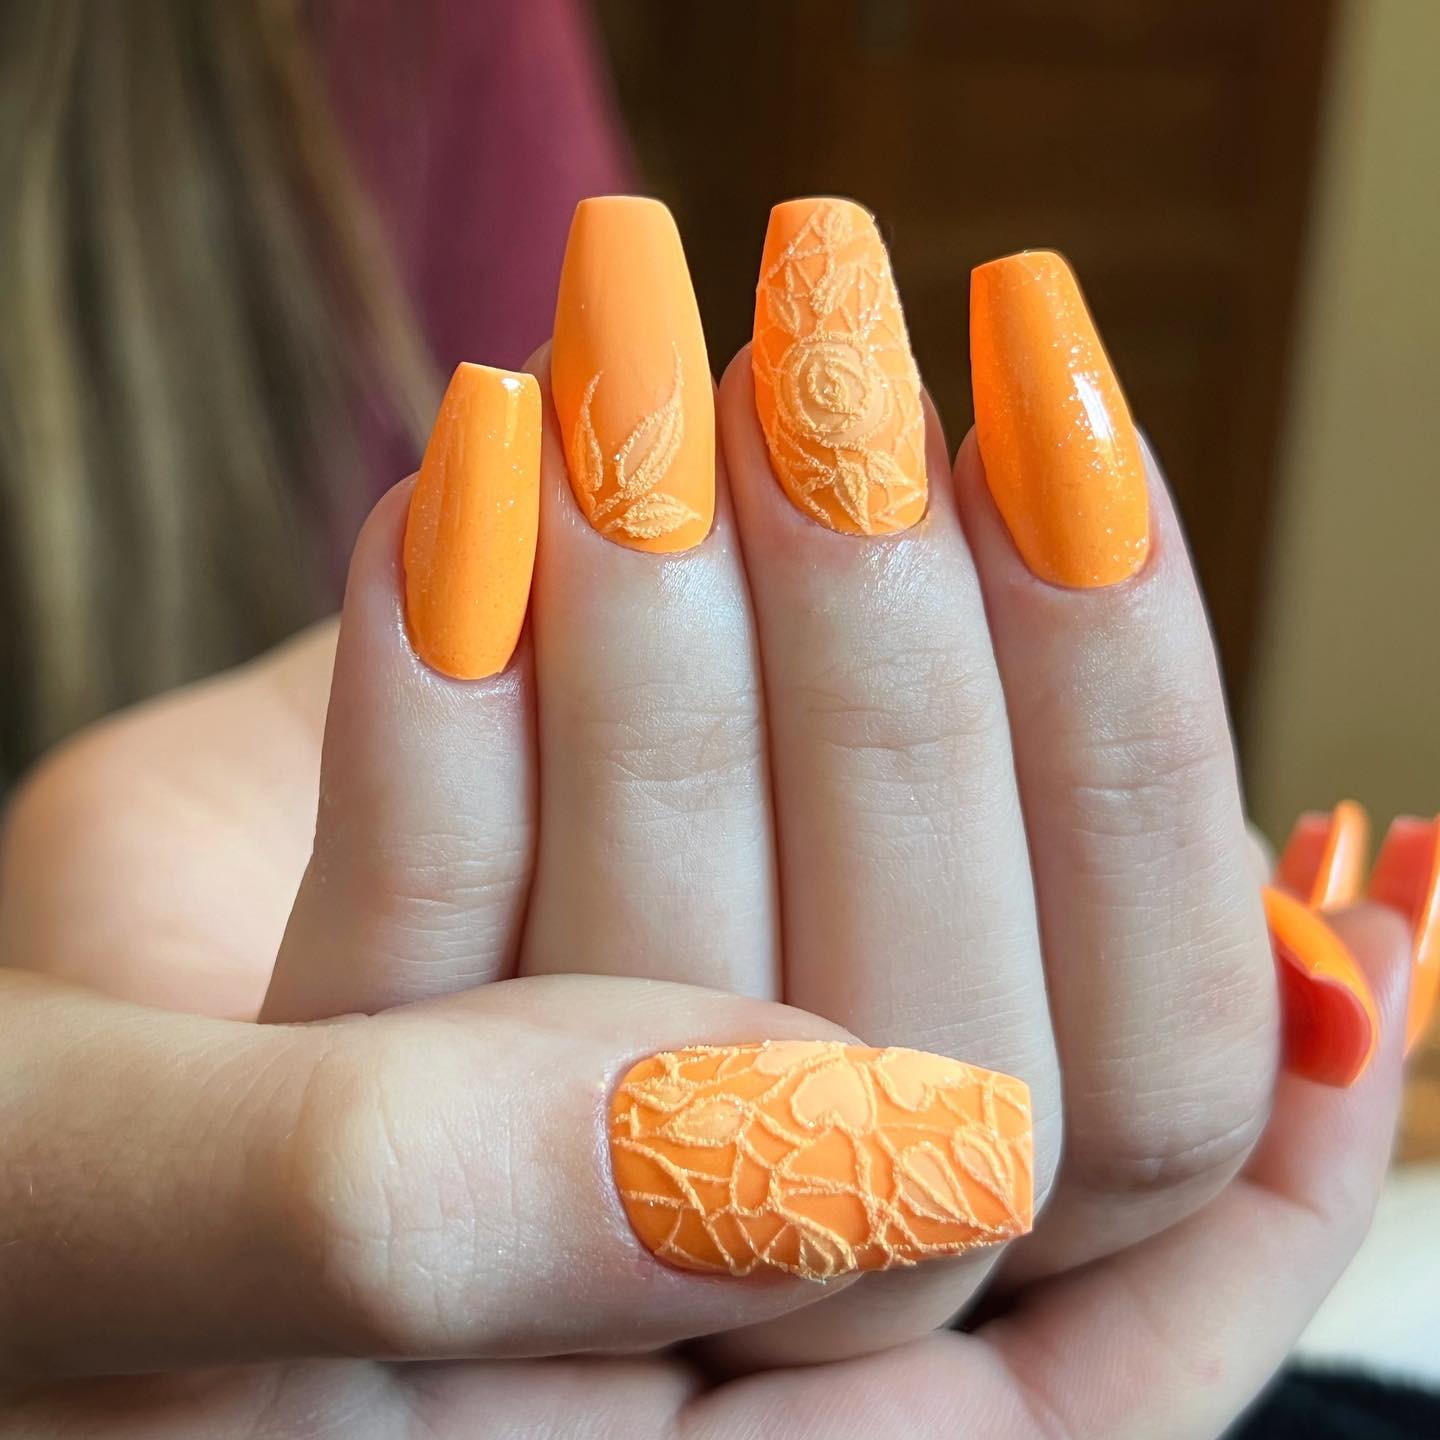 Lace nail art is not something new but there are a few women who still go on applying them. If you like it, you should make a combo with lace and orange color. This floral lace work is ready to give you some authentic vibes!